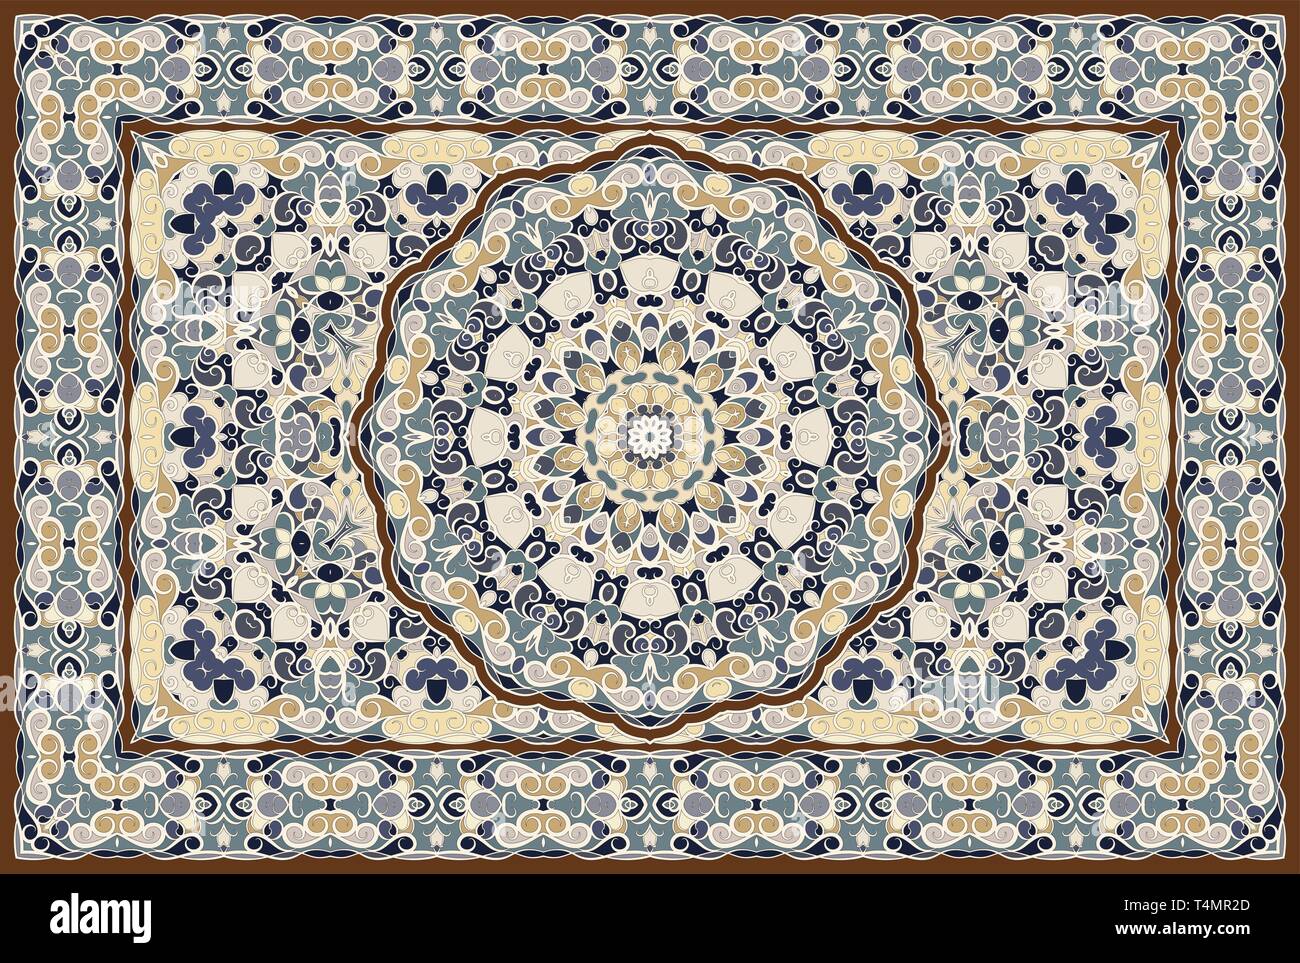 Old persian carpet Stock Vector Images - Alamy